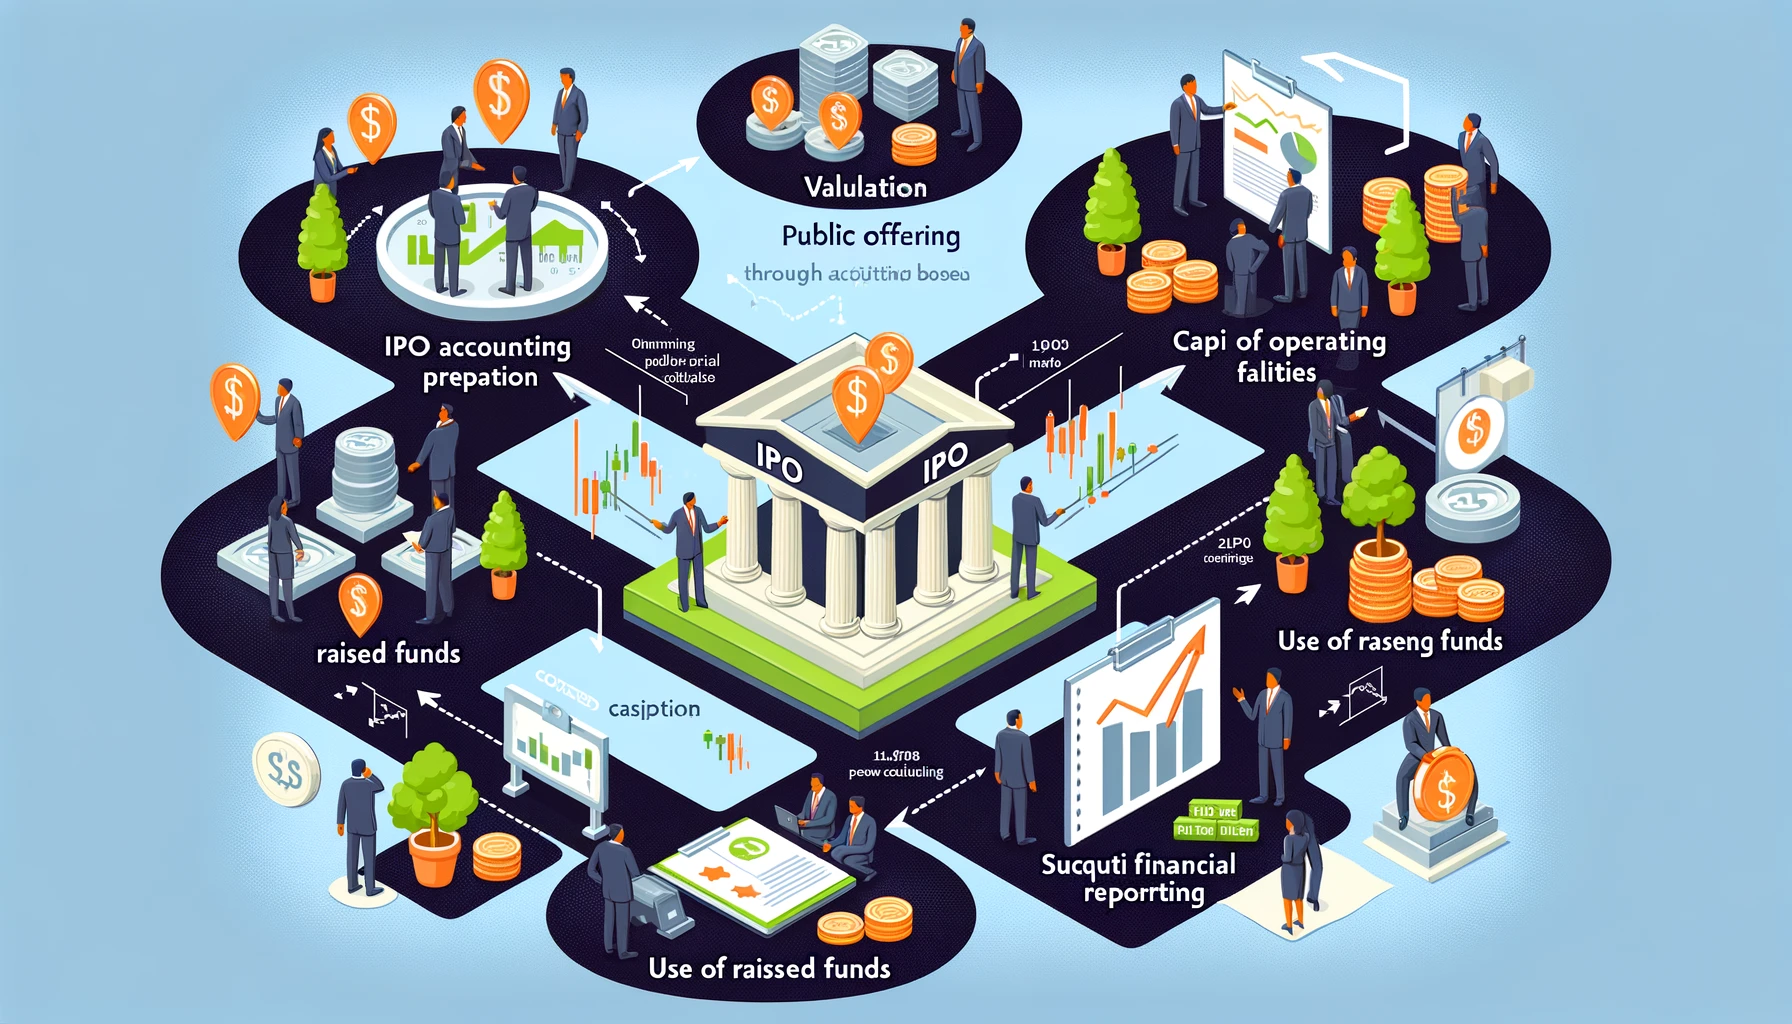 The image includes a flowchart or diagram that shows the steps of IPO preparation&#44; capital raising through public offering&#44; the use of raised funds&#44; and subsequent financial reporting.